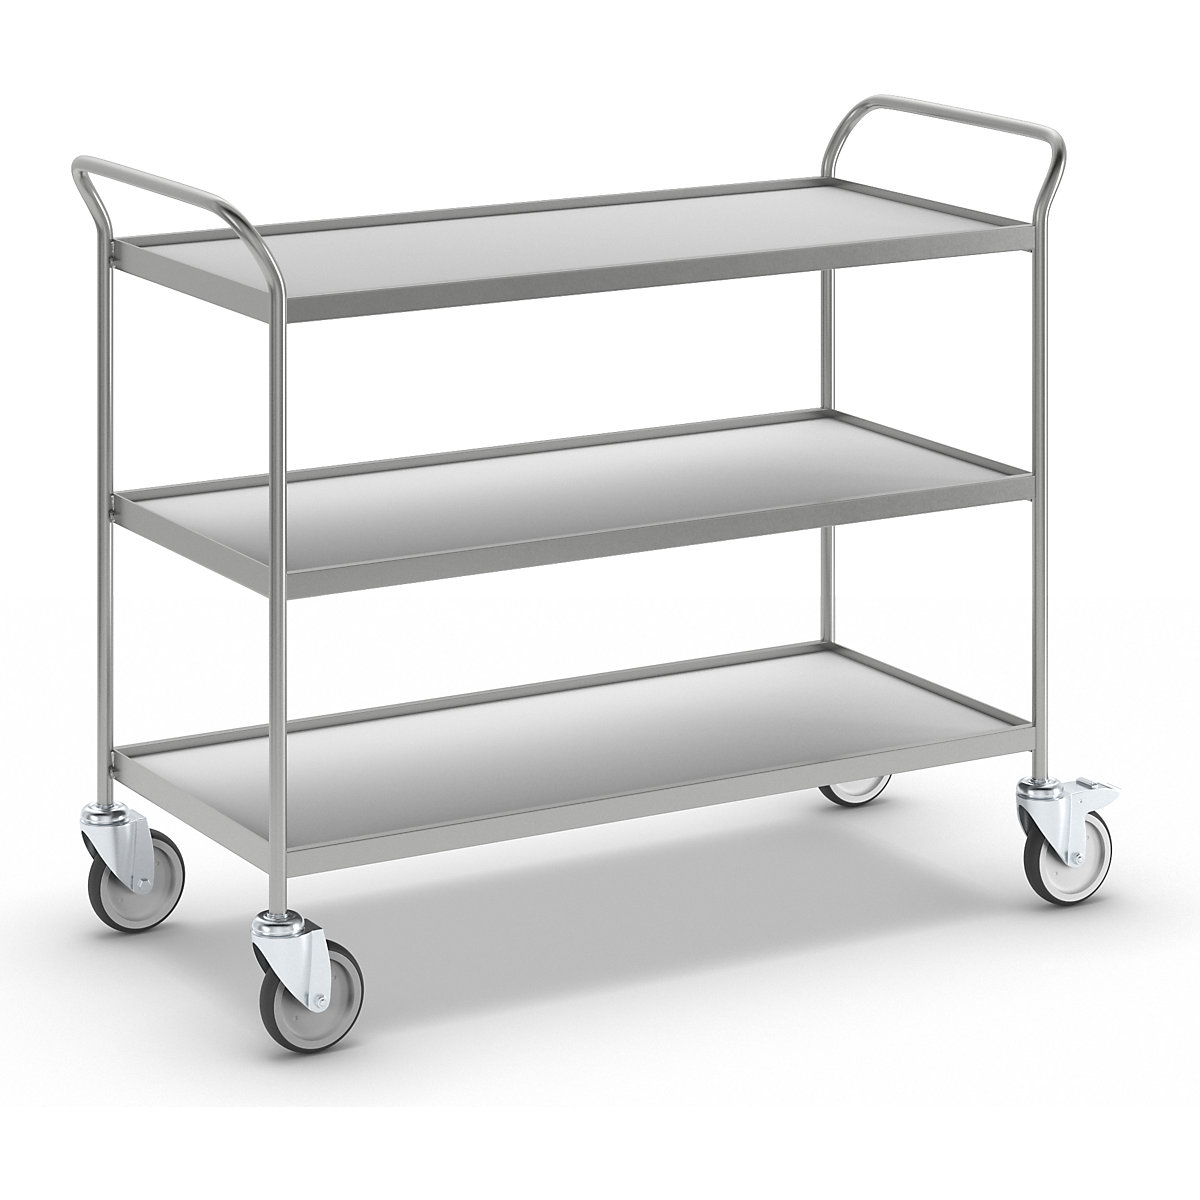 Serving trolley – eurokraft pro, 3 shelves in grey, with 4 swivel castors, 2 with double stops-8